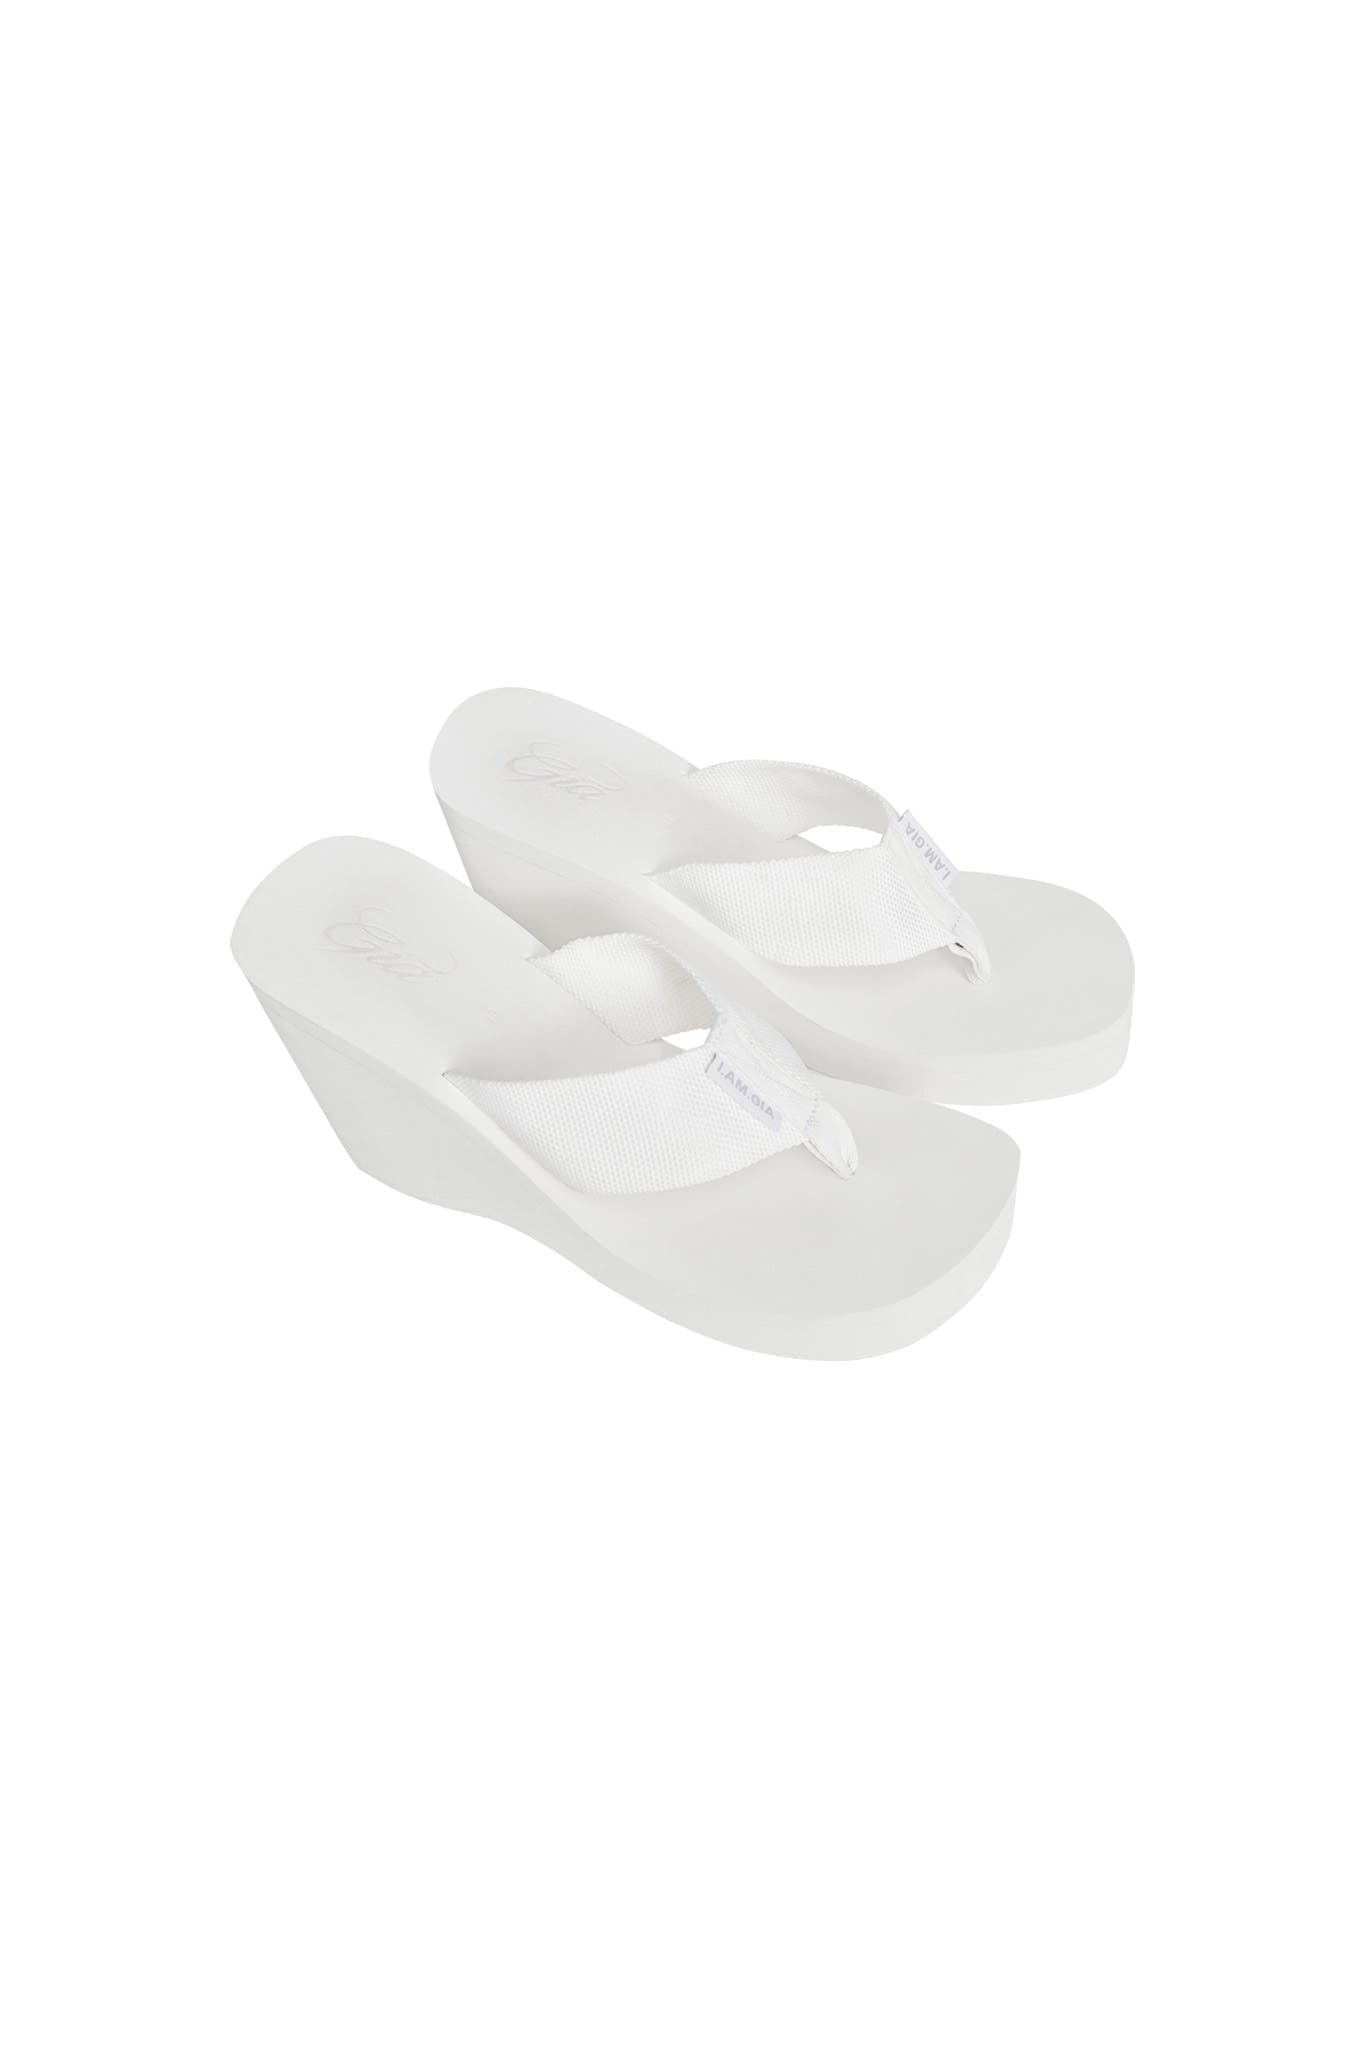 SHELBY FLIP FLOP - WHITE